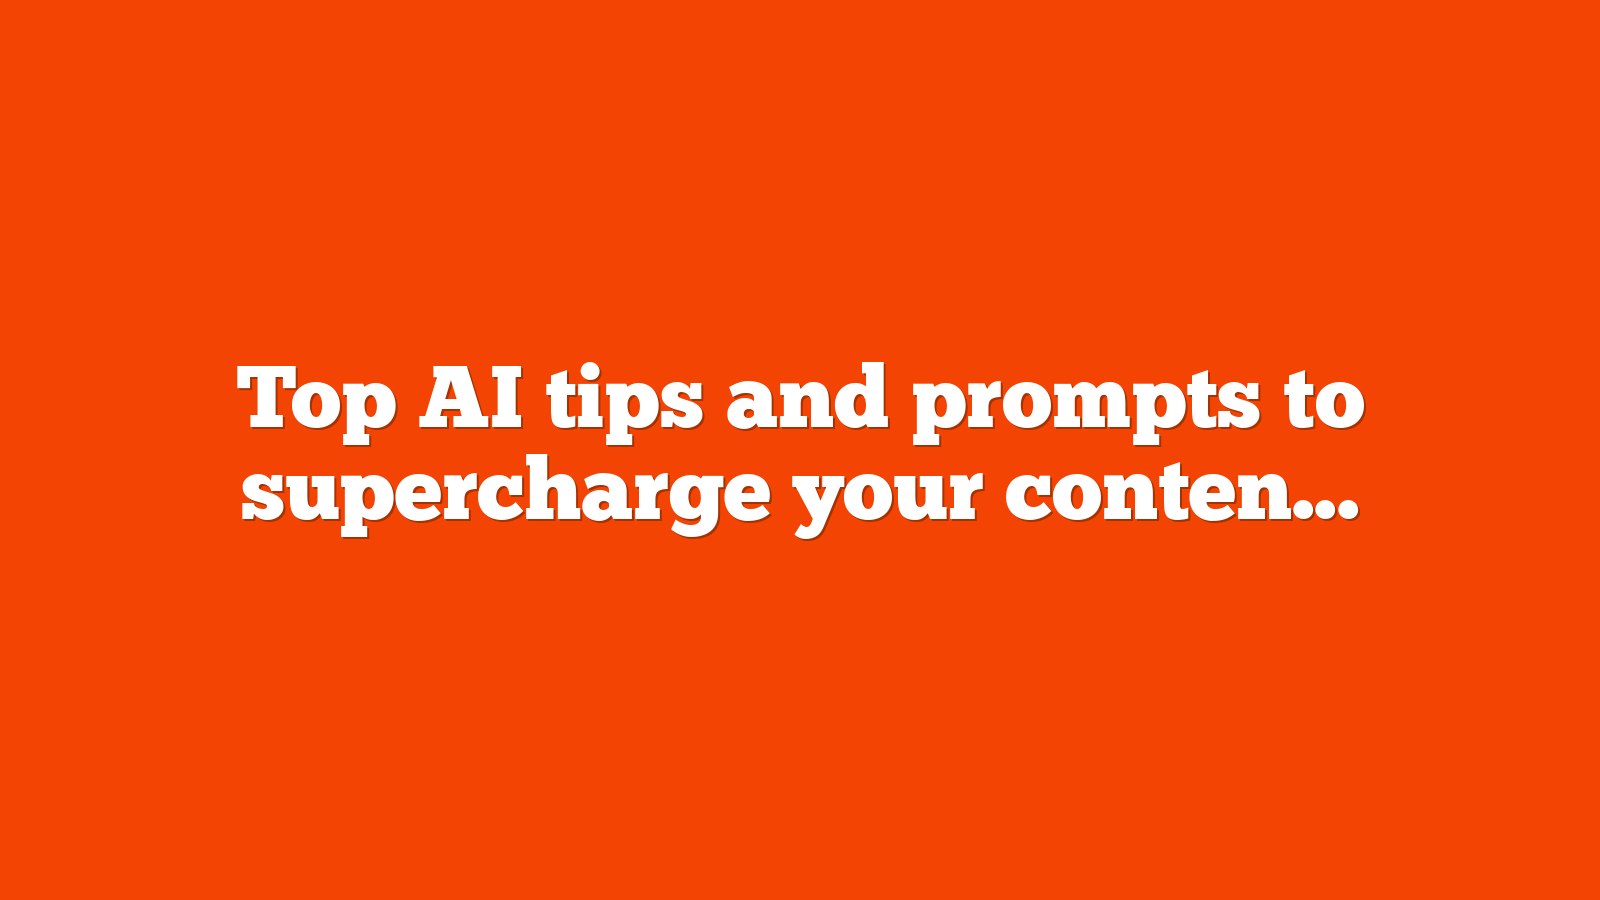 Top AI tips and prompts to supercharge your content marketing